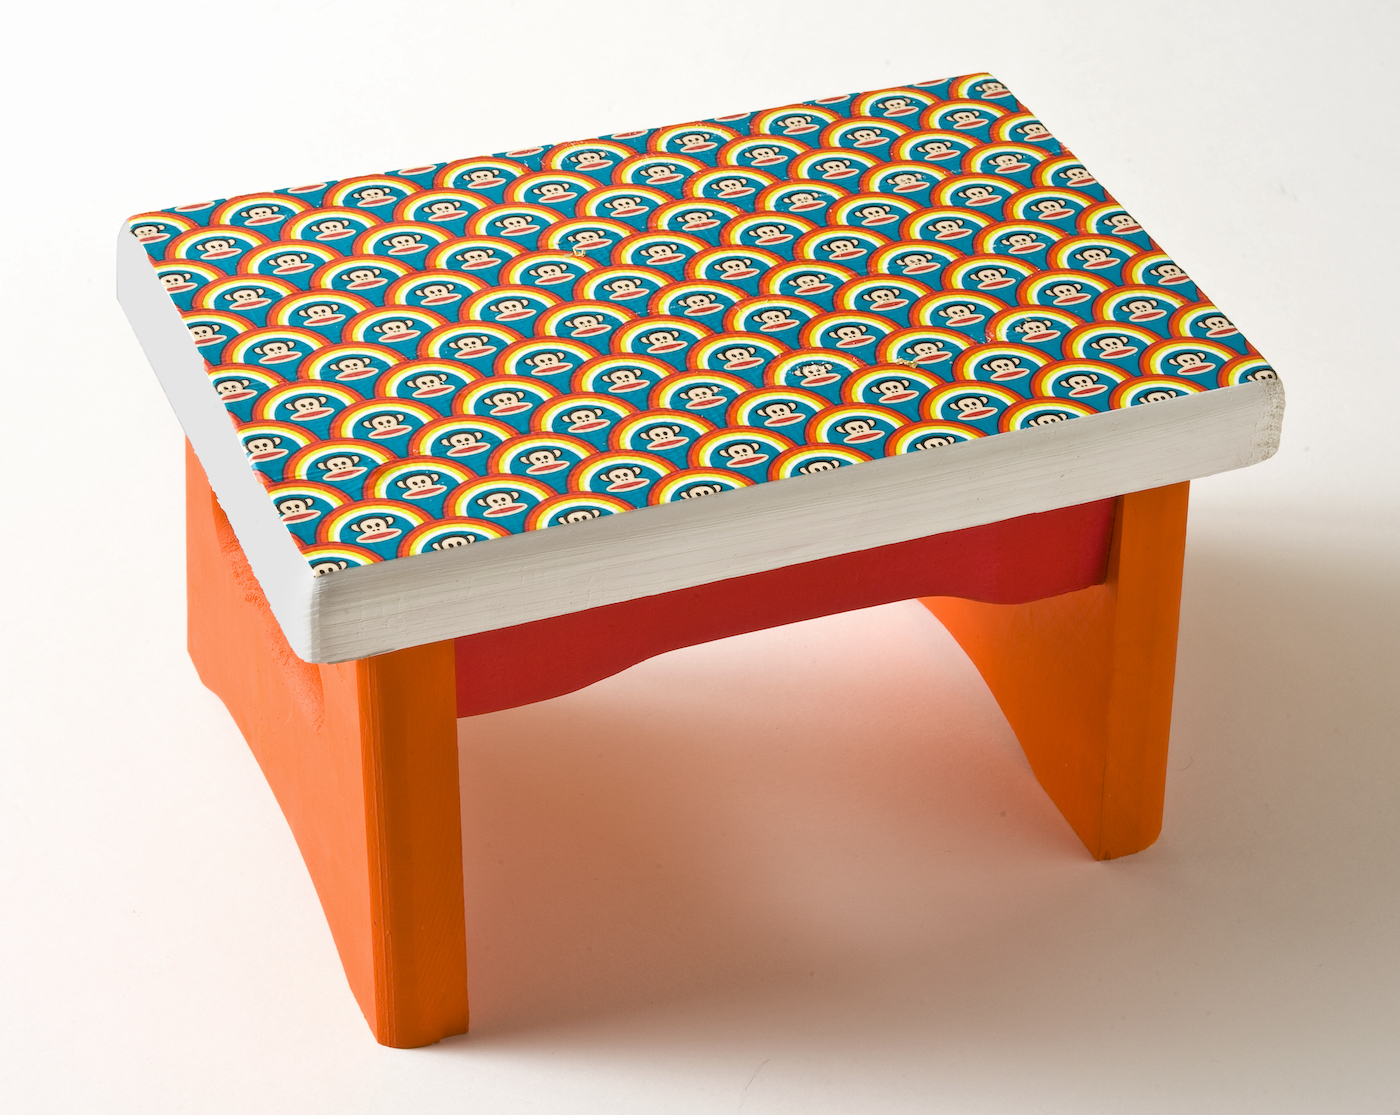 How to decorate a stool with duct tape